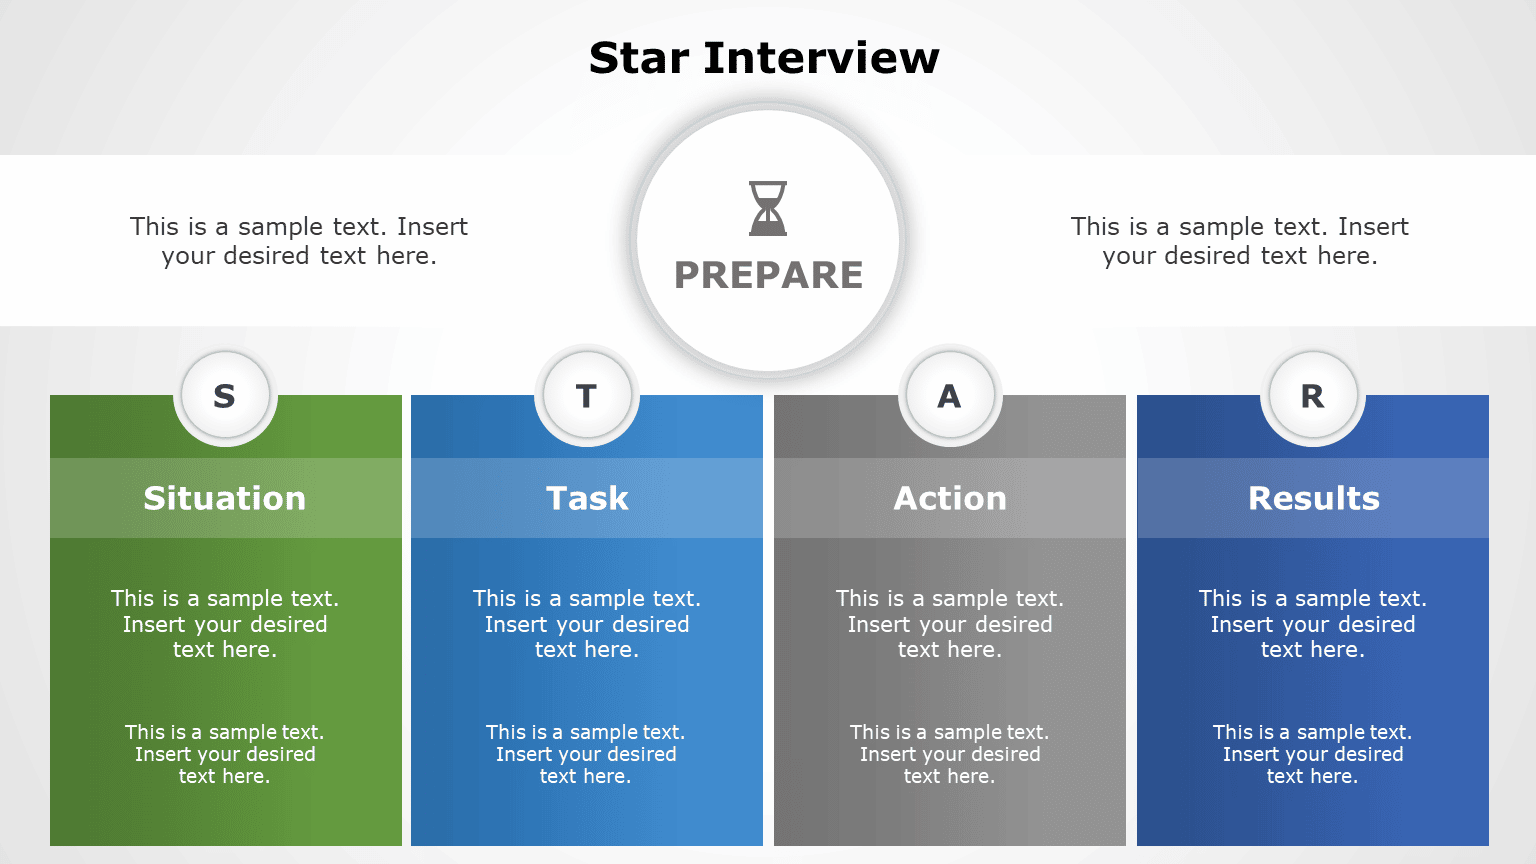 Nail That Interview Using The STAR Interview Method